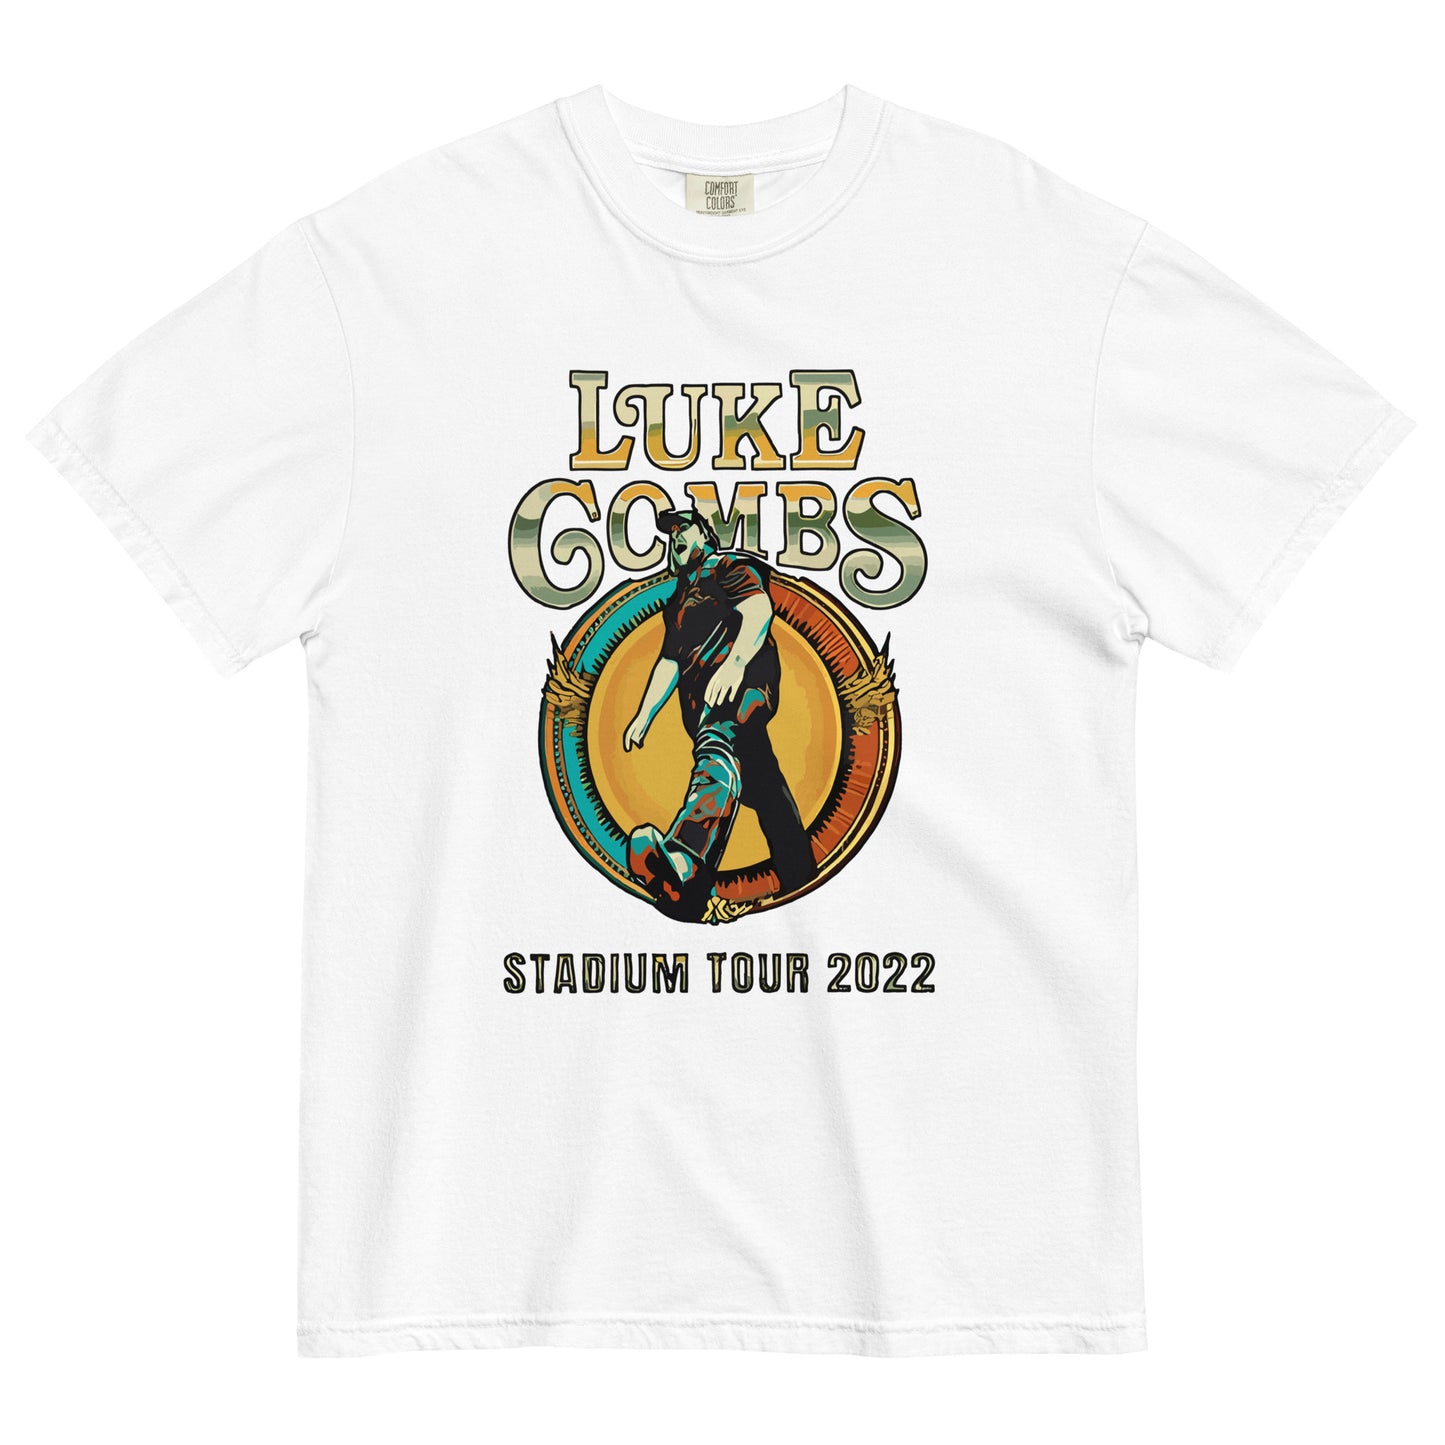 Combs Tour Comfort Colors Graphic Tee